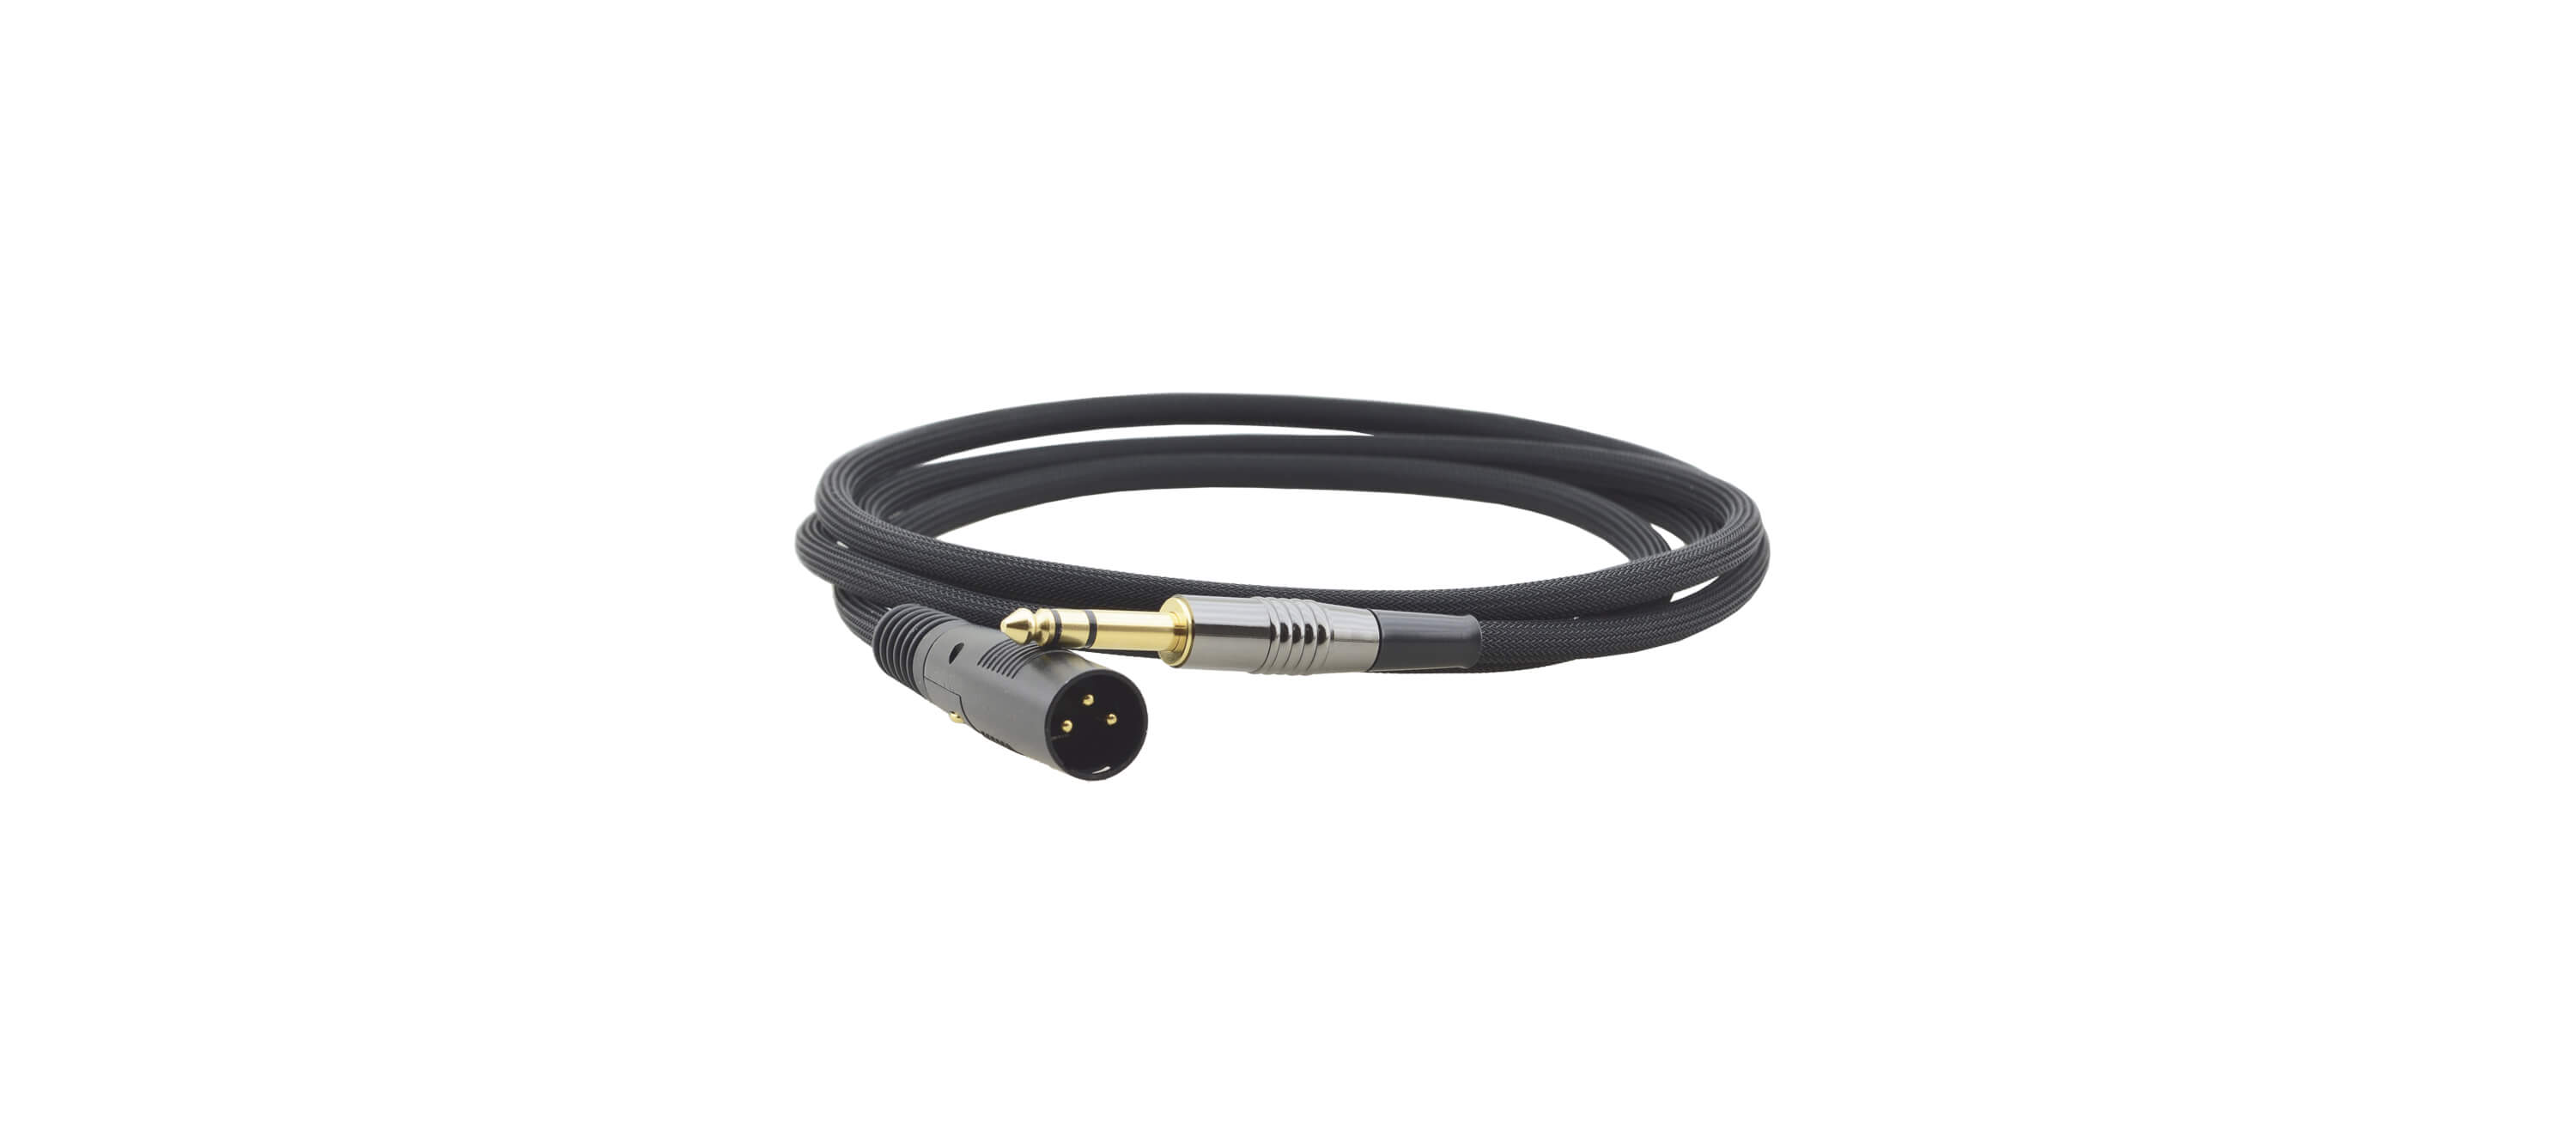 25 Foot 1/4 (6.3mm) Stereo Headphone Cable